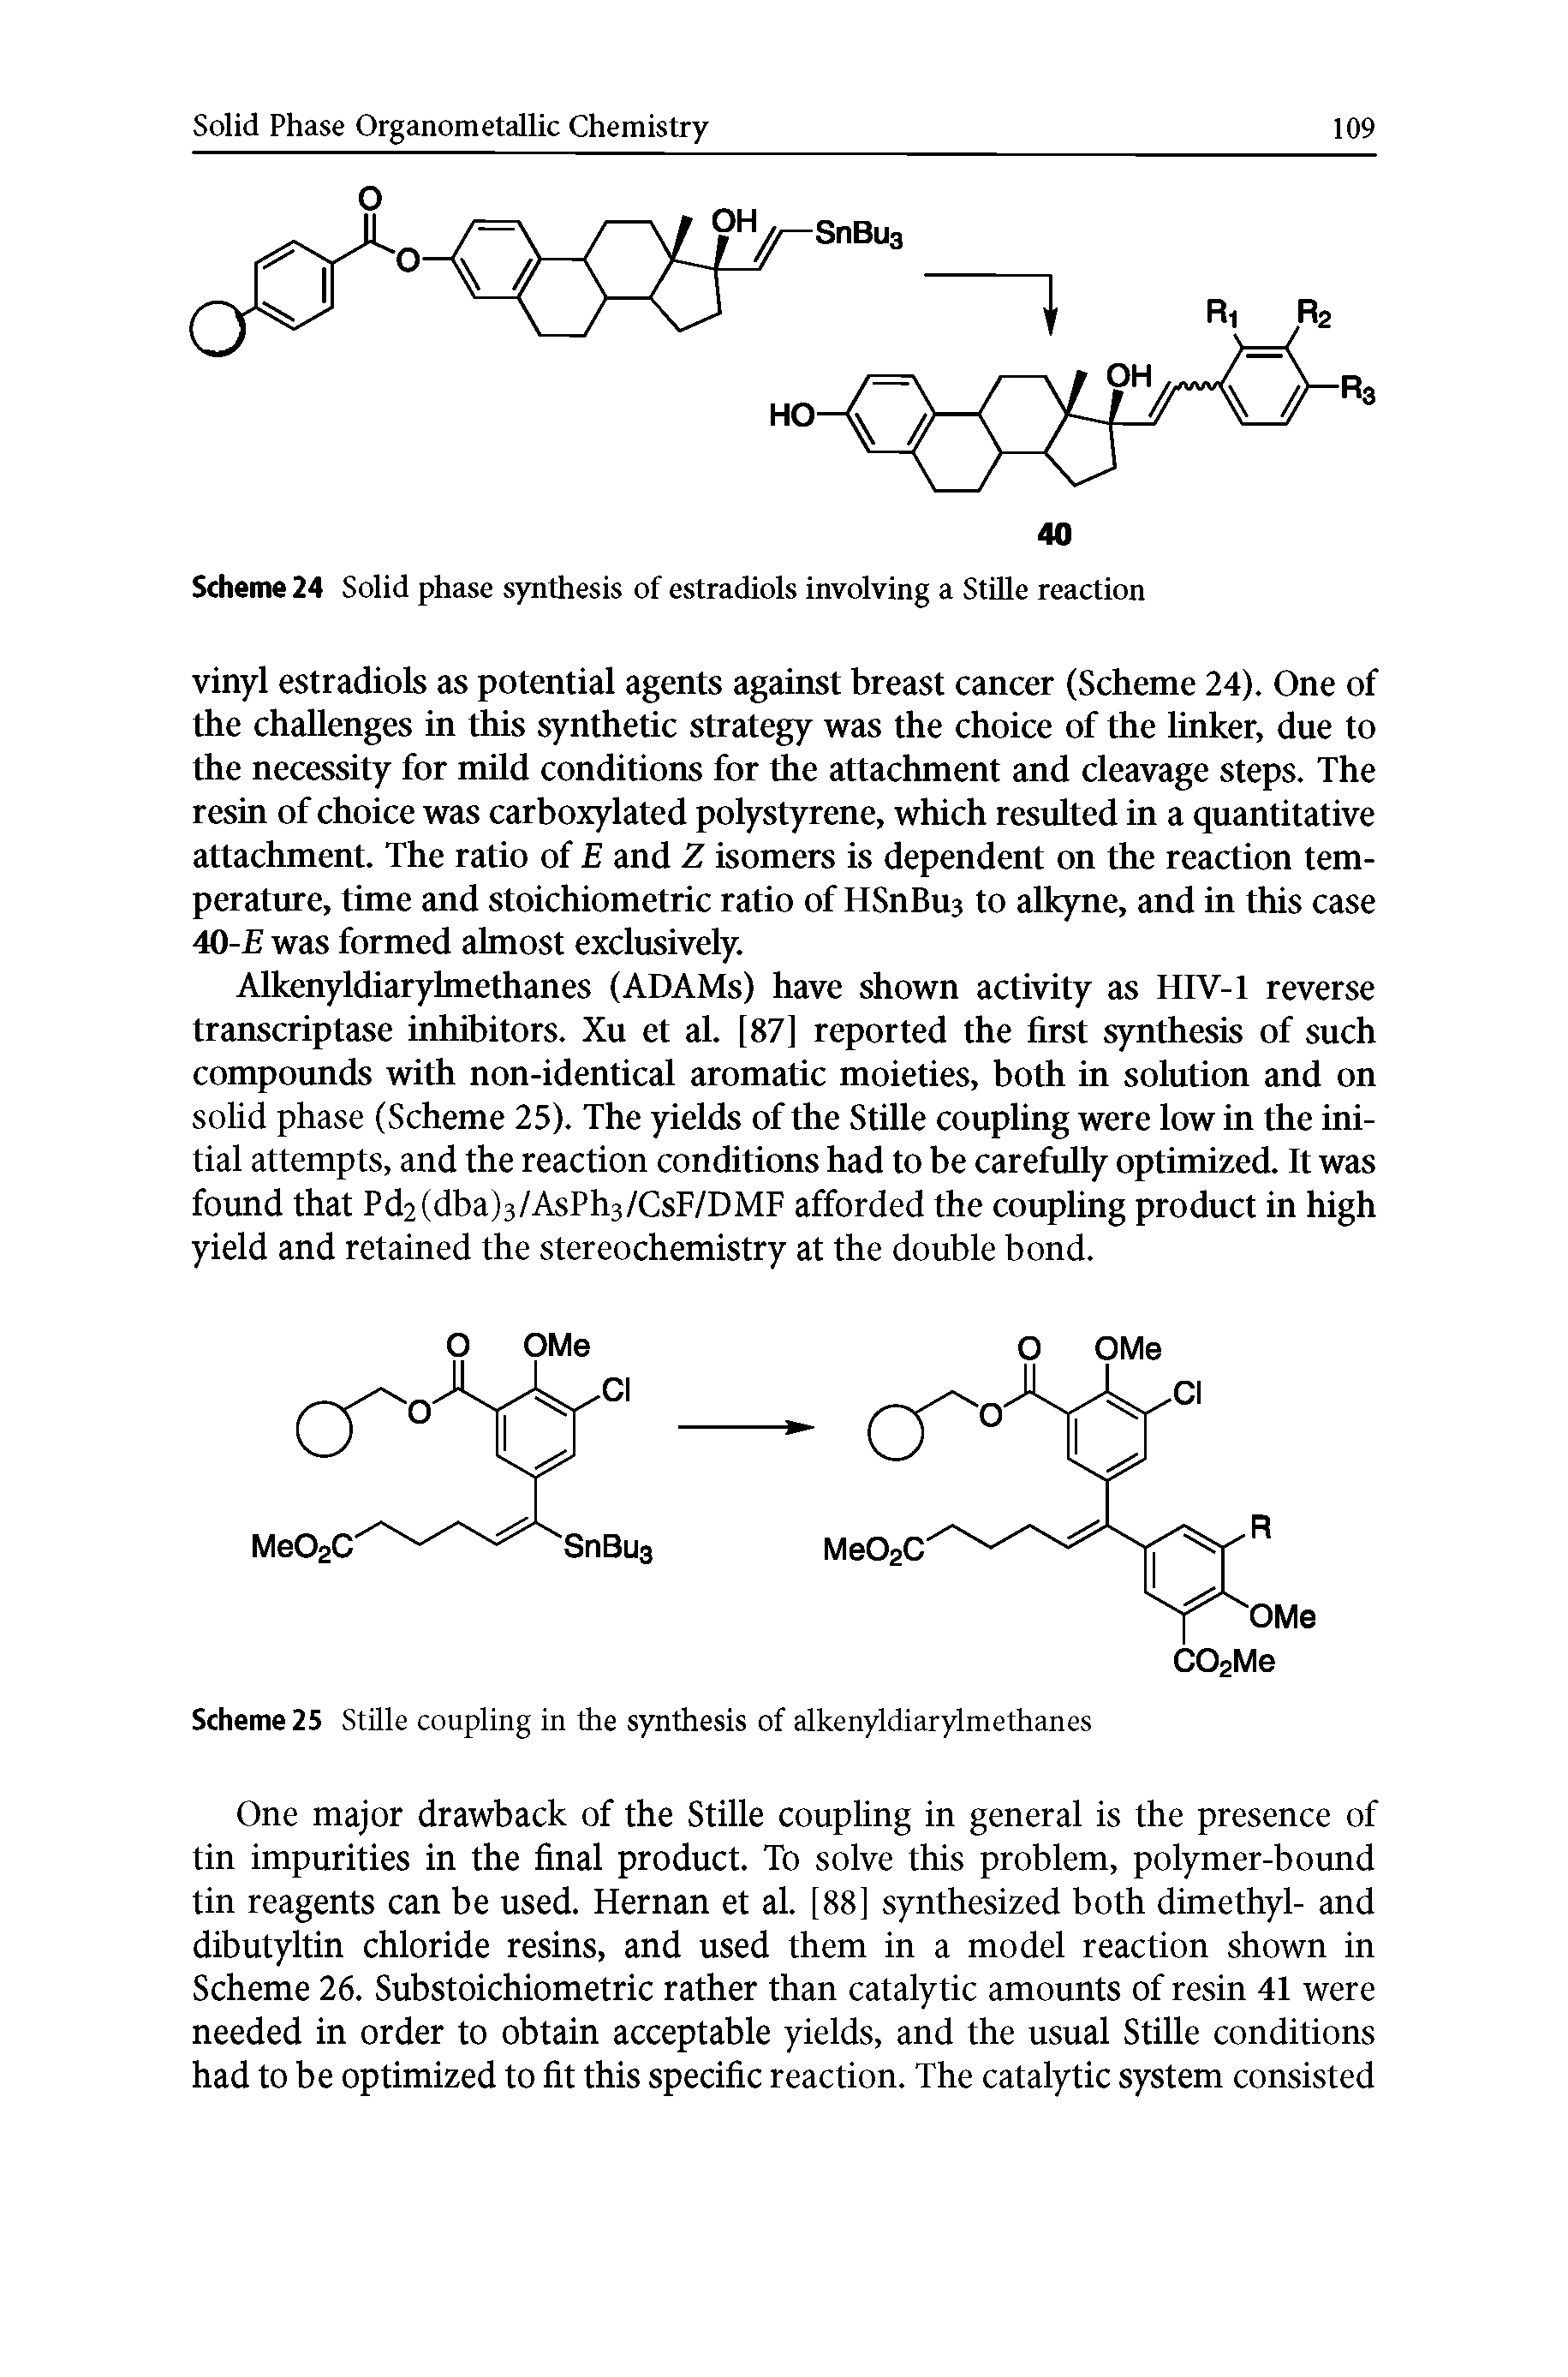 Scheme 24 Solid phase synthesis of estradiols involving a Stille reaction...